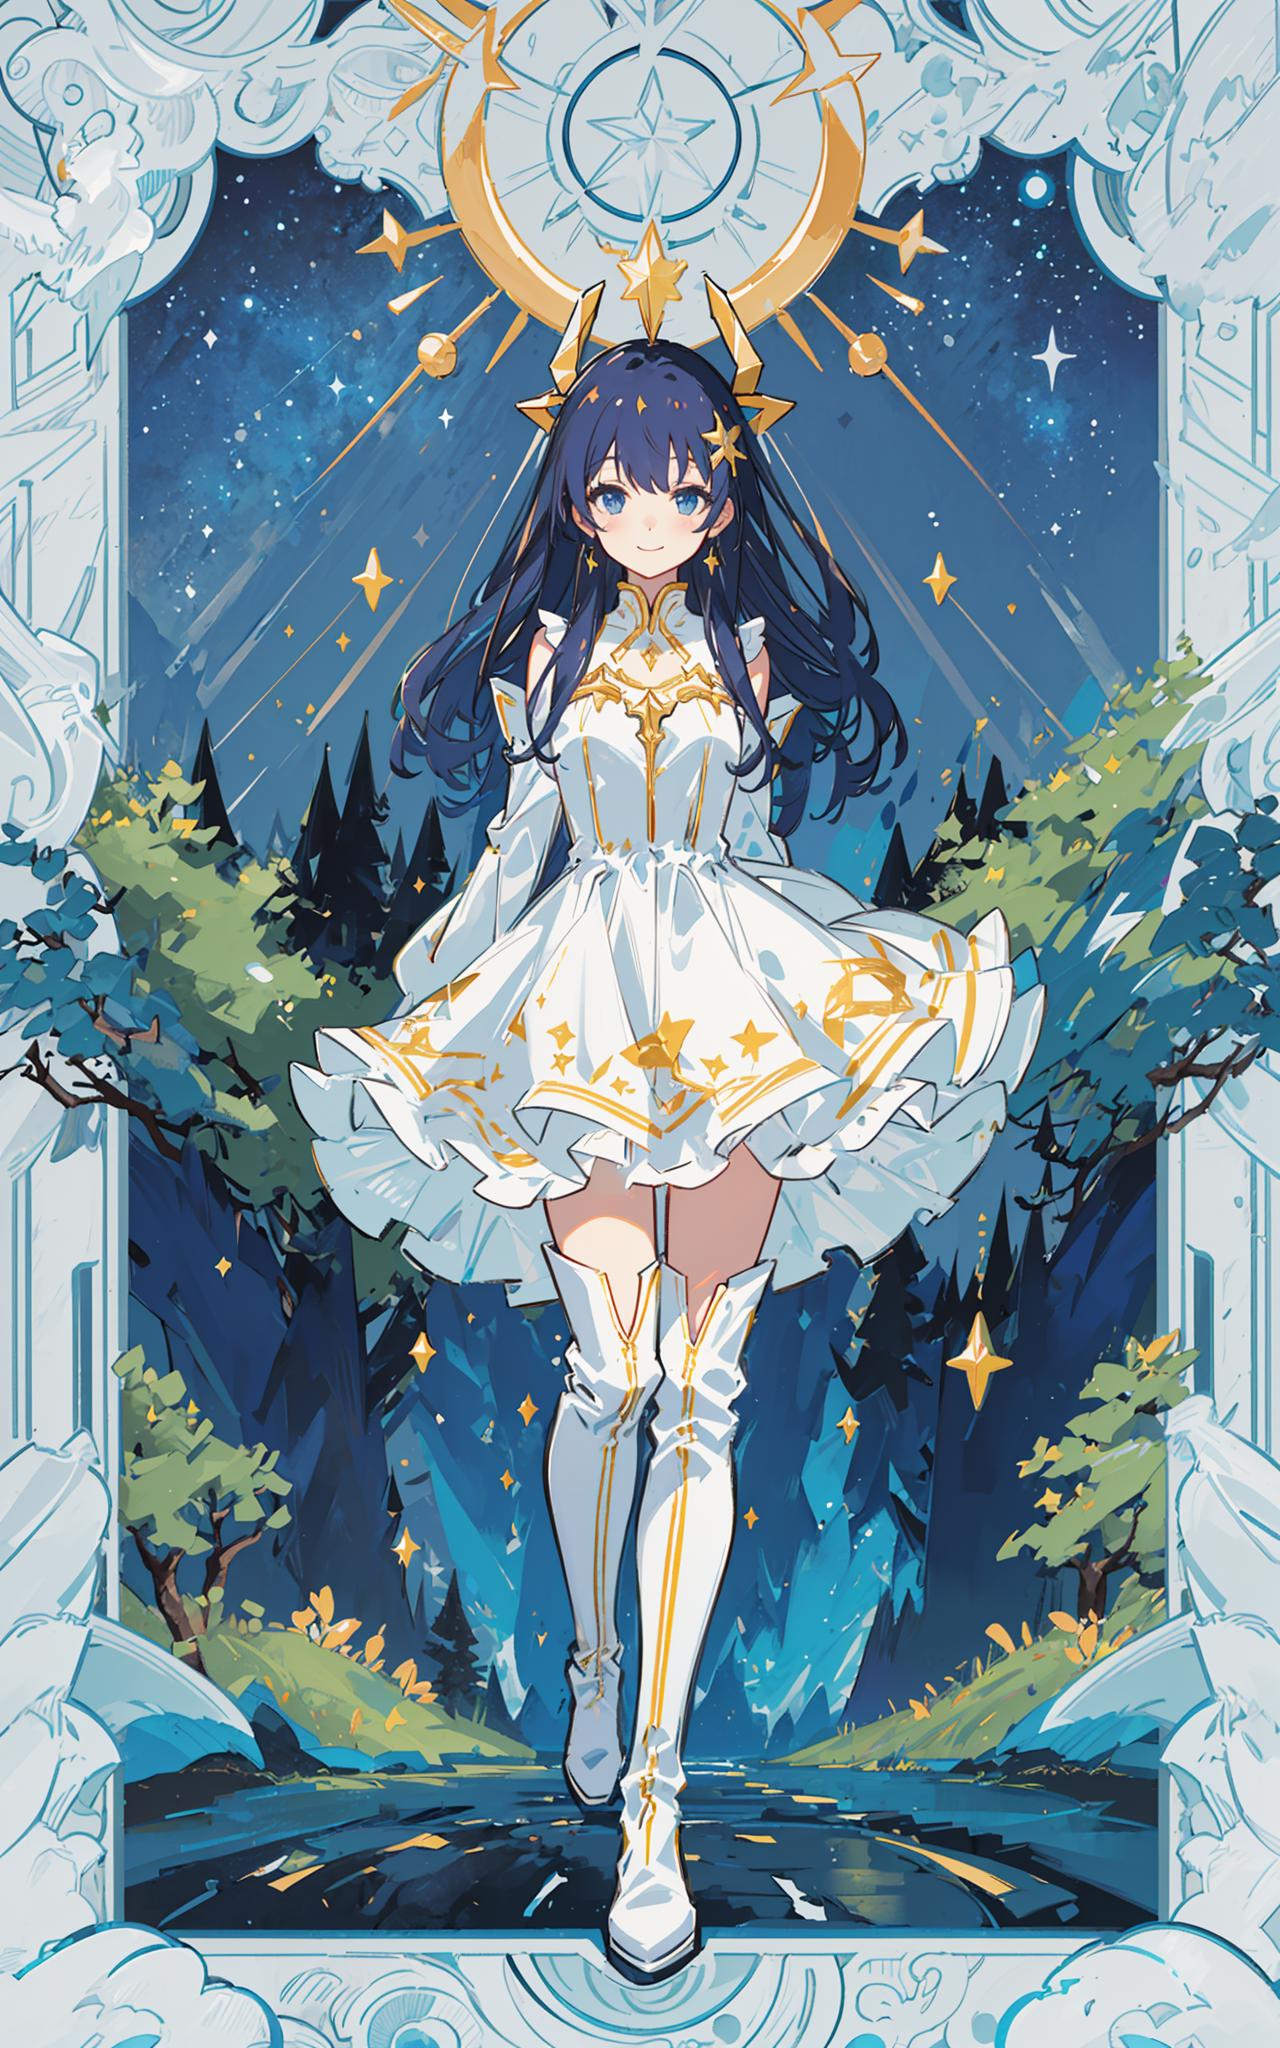 Anime Character in White Dress with Gold Stars and Blue Hair.